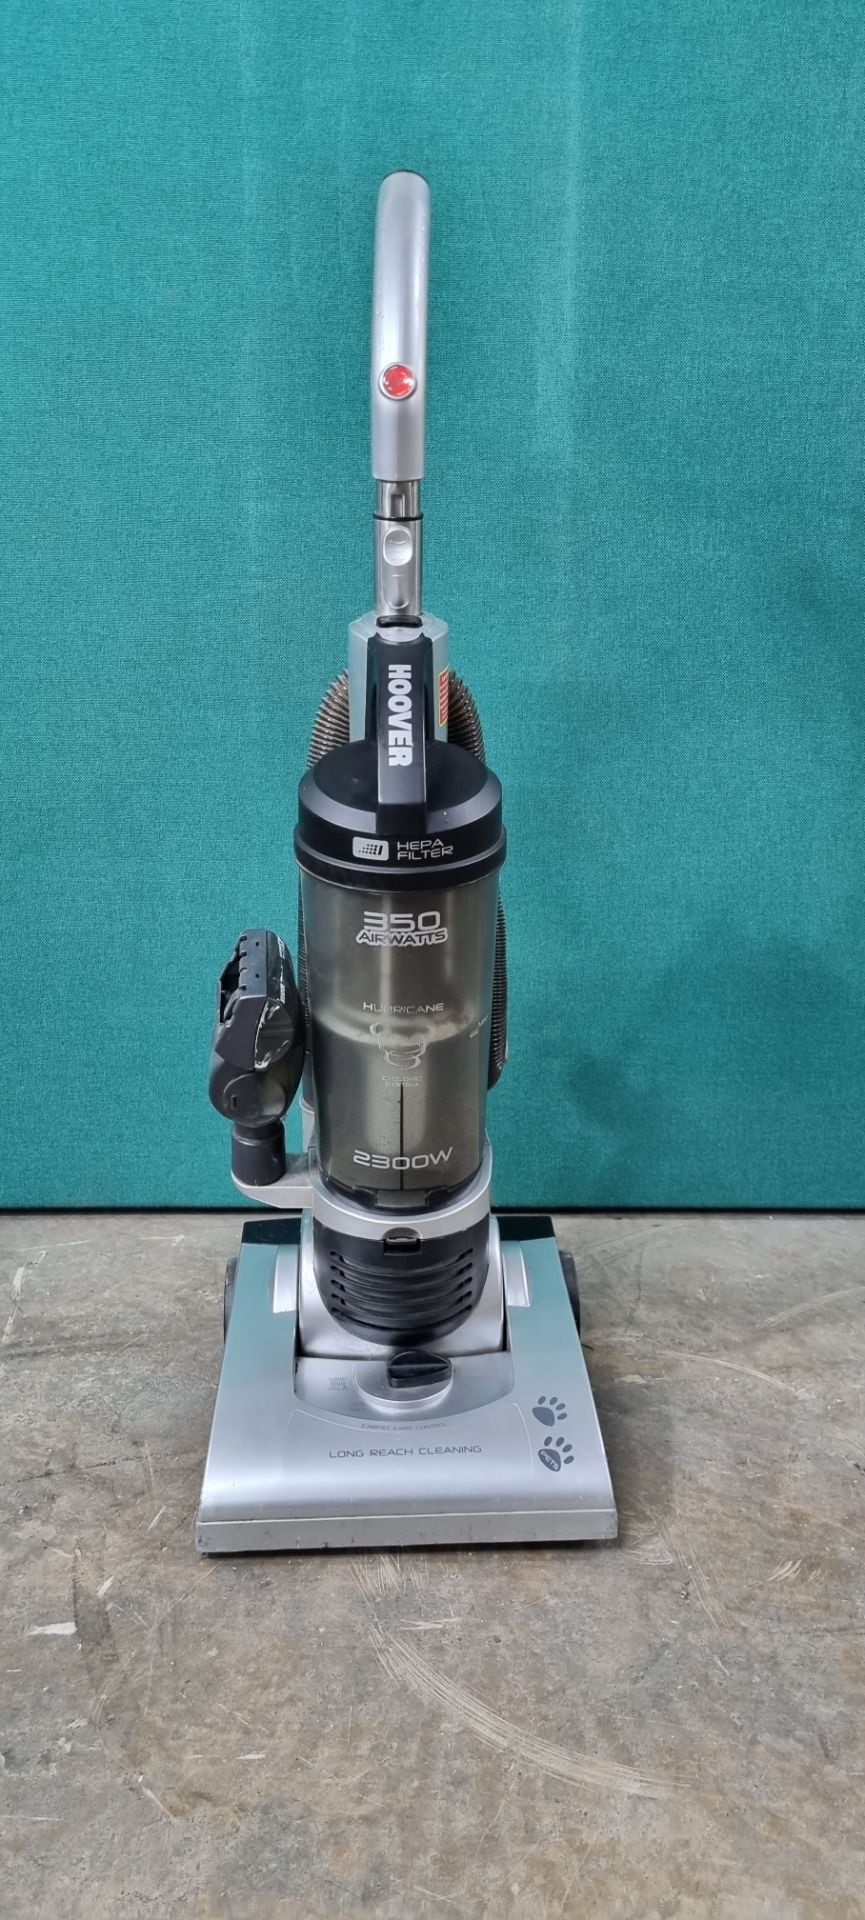 1 x Hoover 2300W Long Reach Cleaning Vacuum Cleaner HP2300001